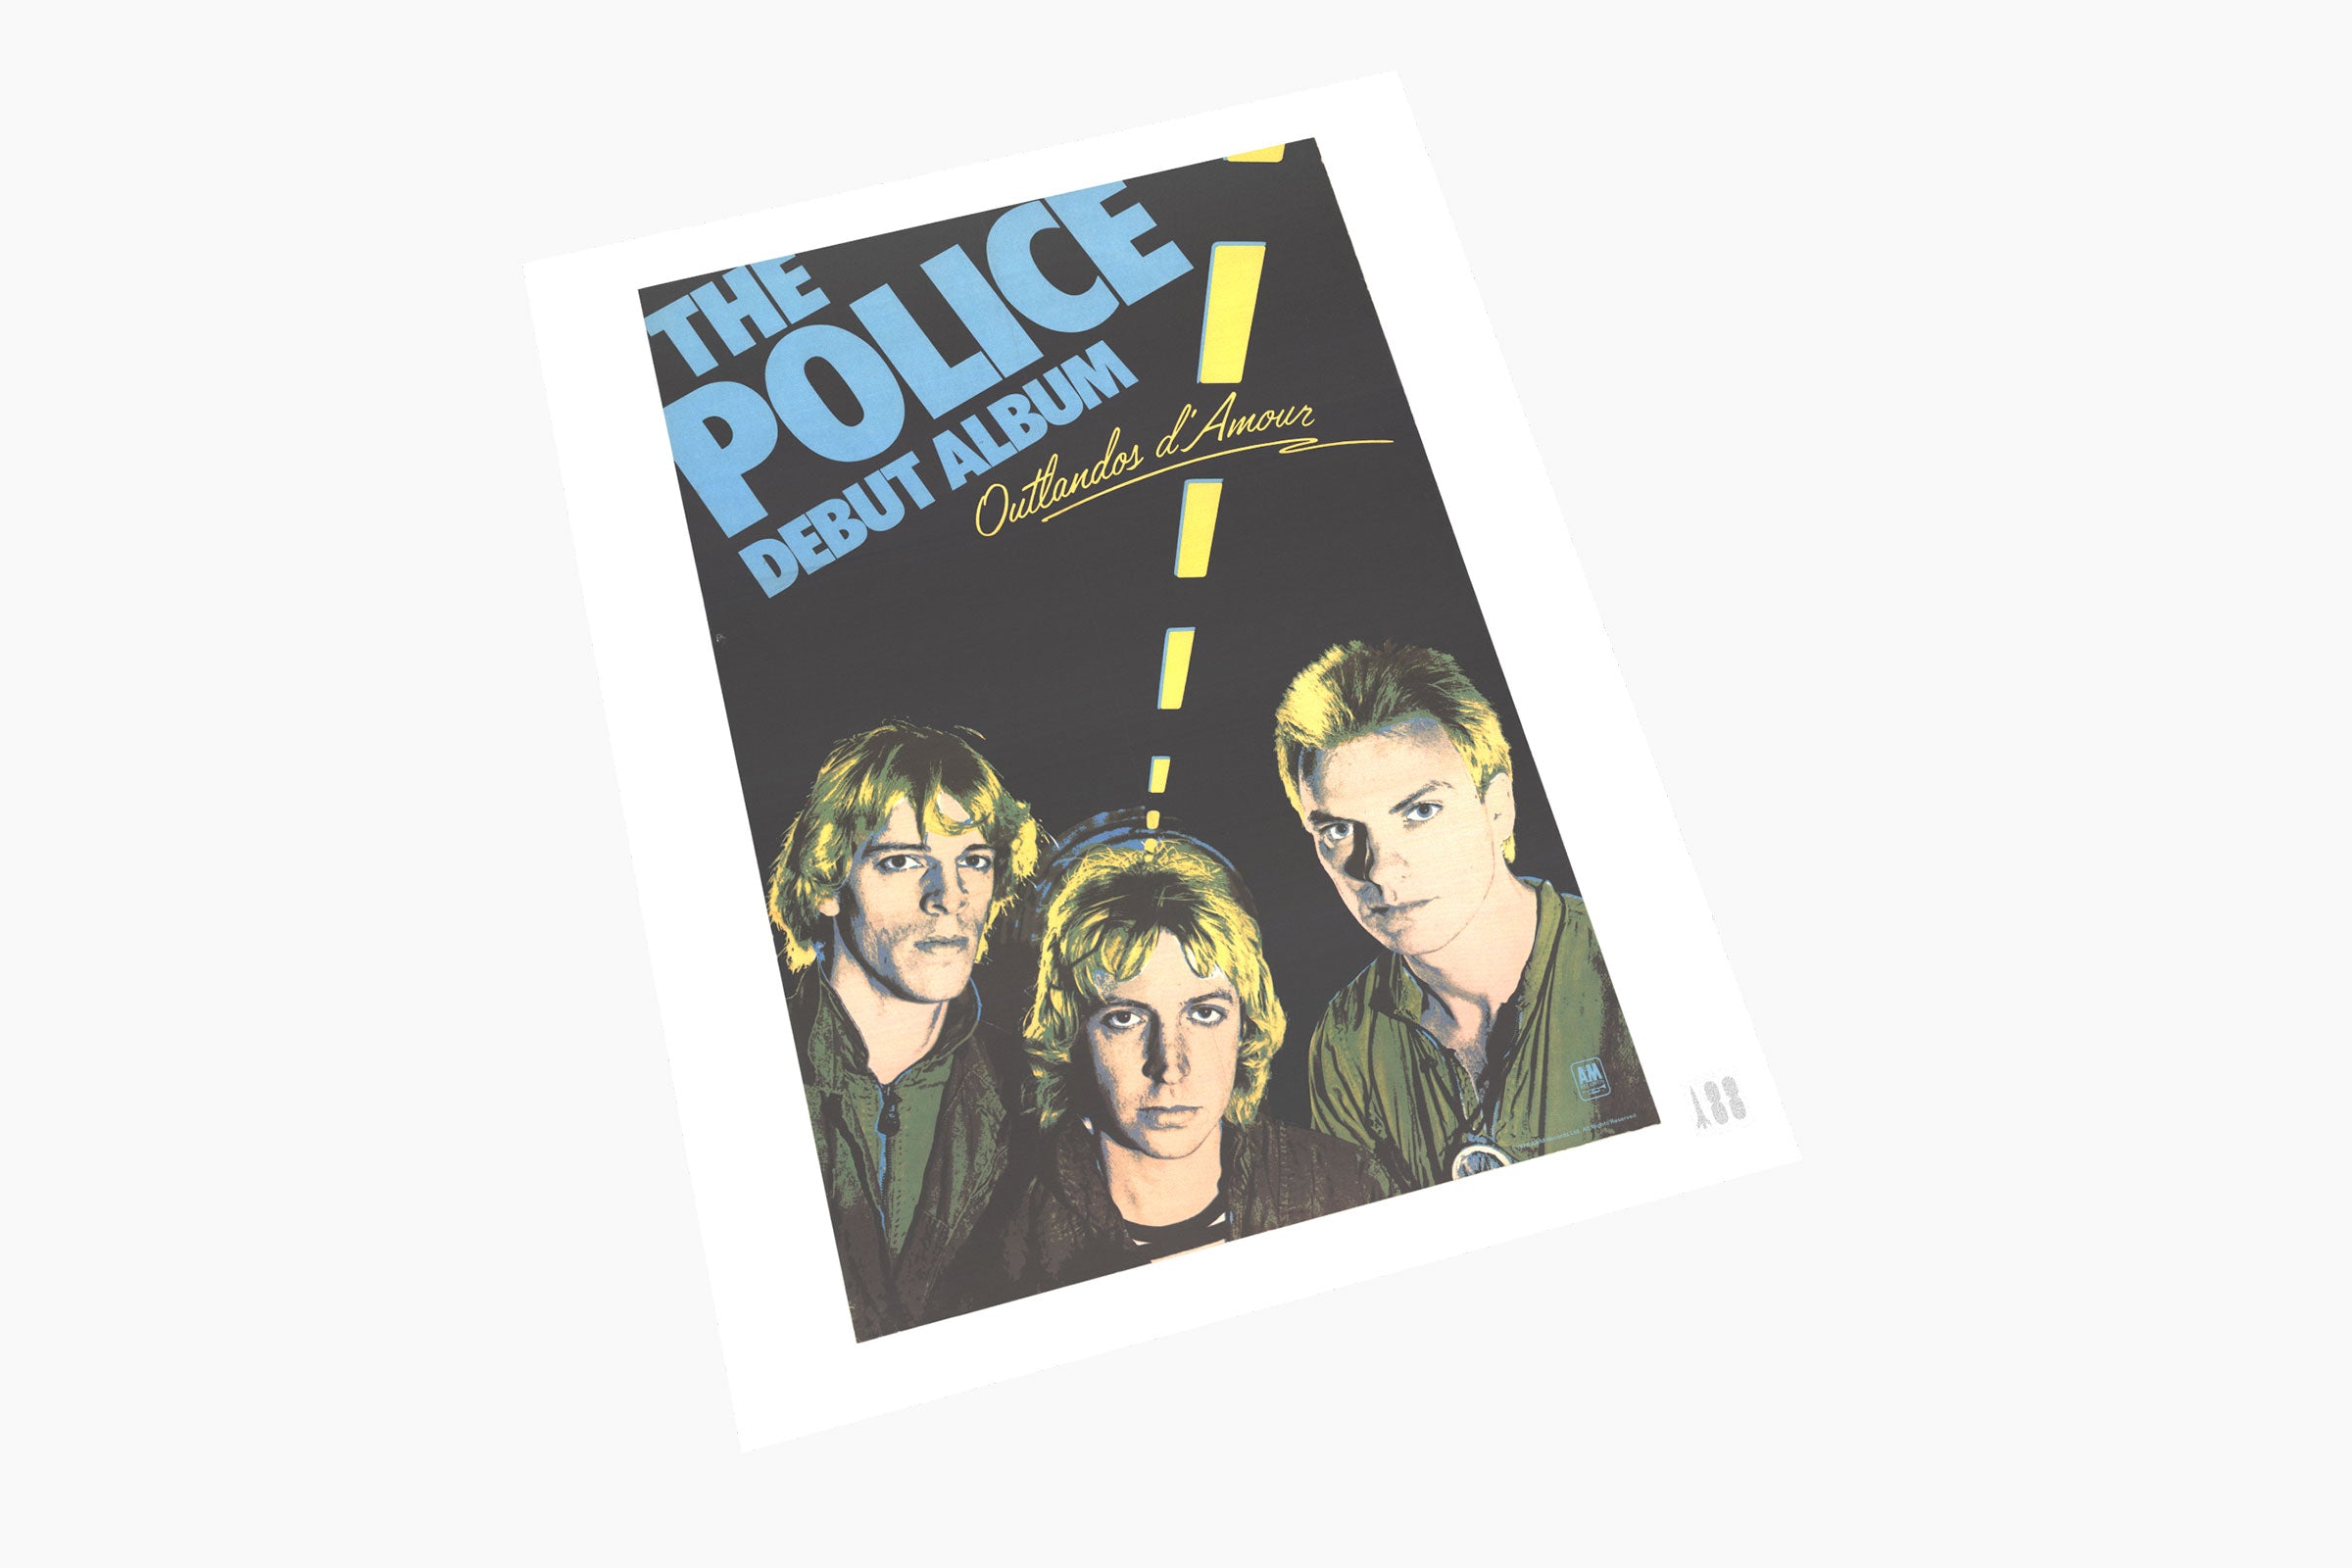 Stewart Copeland’s Police Diaries (Ultimate Edition)